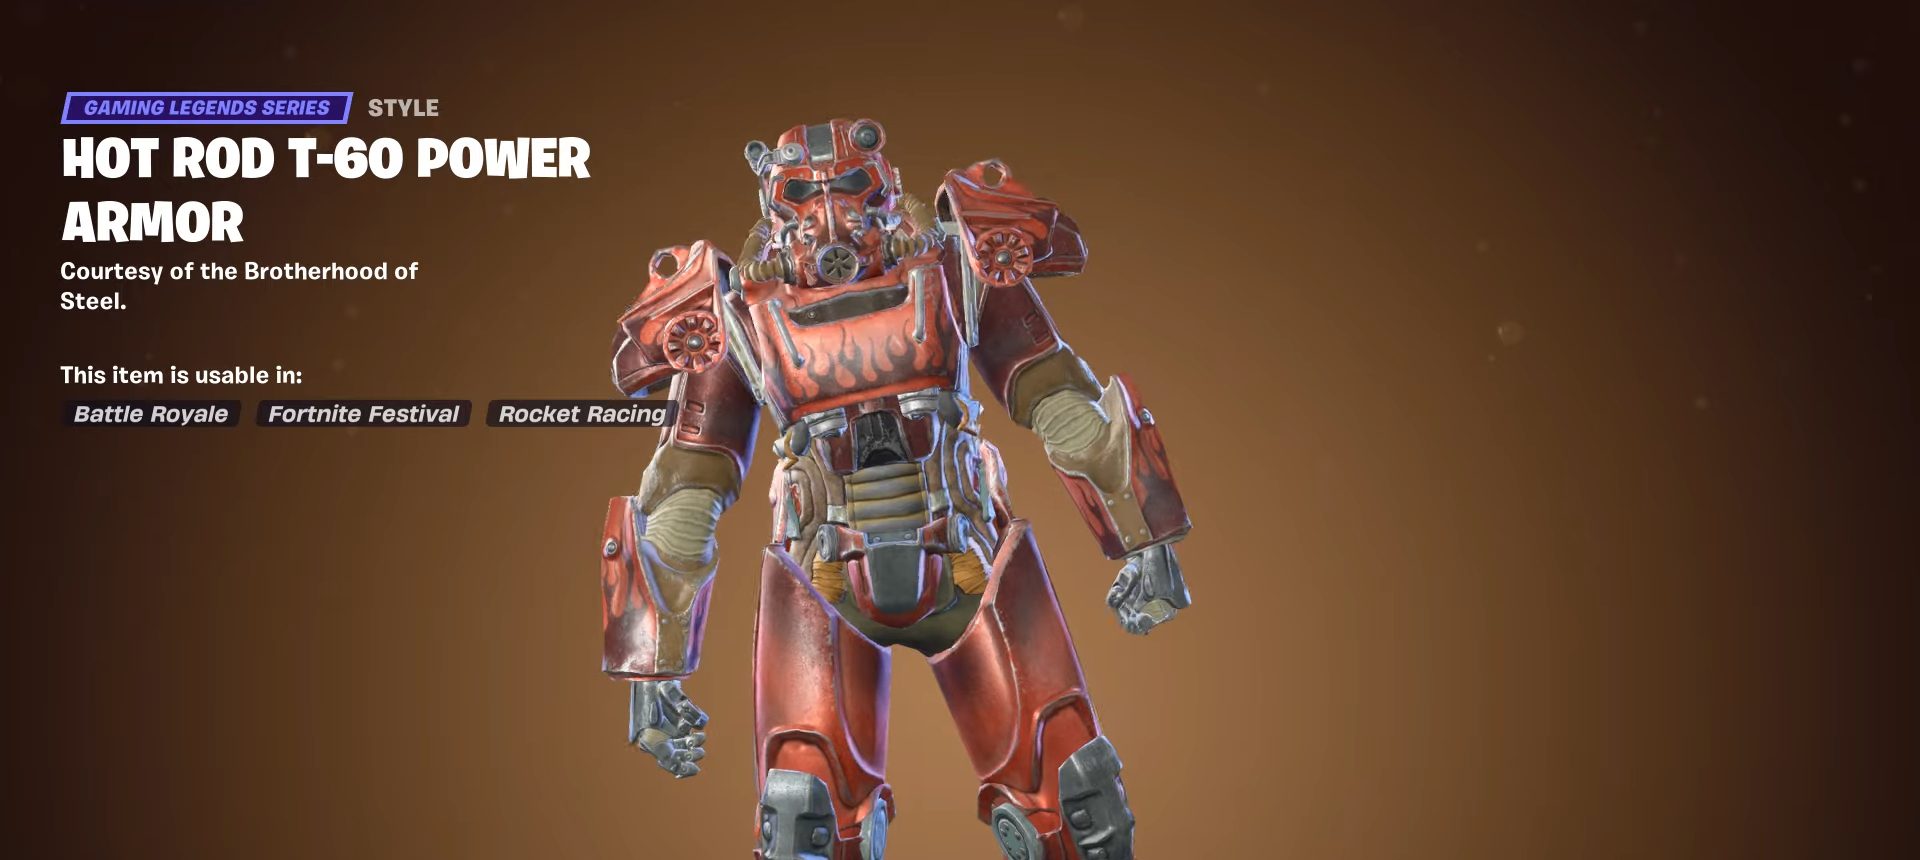 A red power armor in Fortnite.